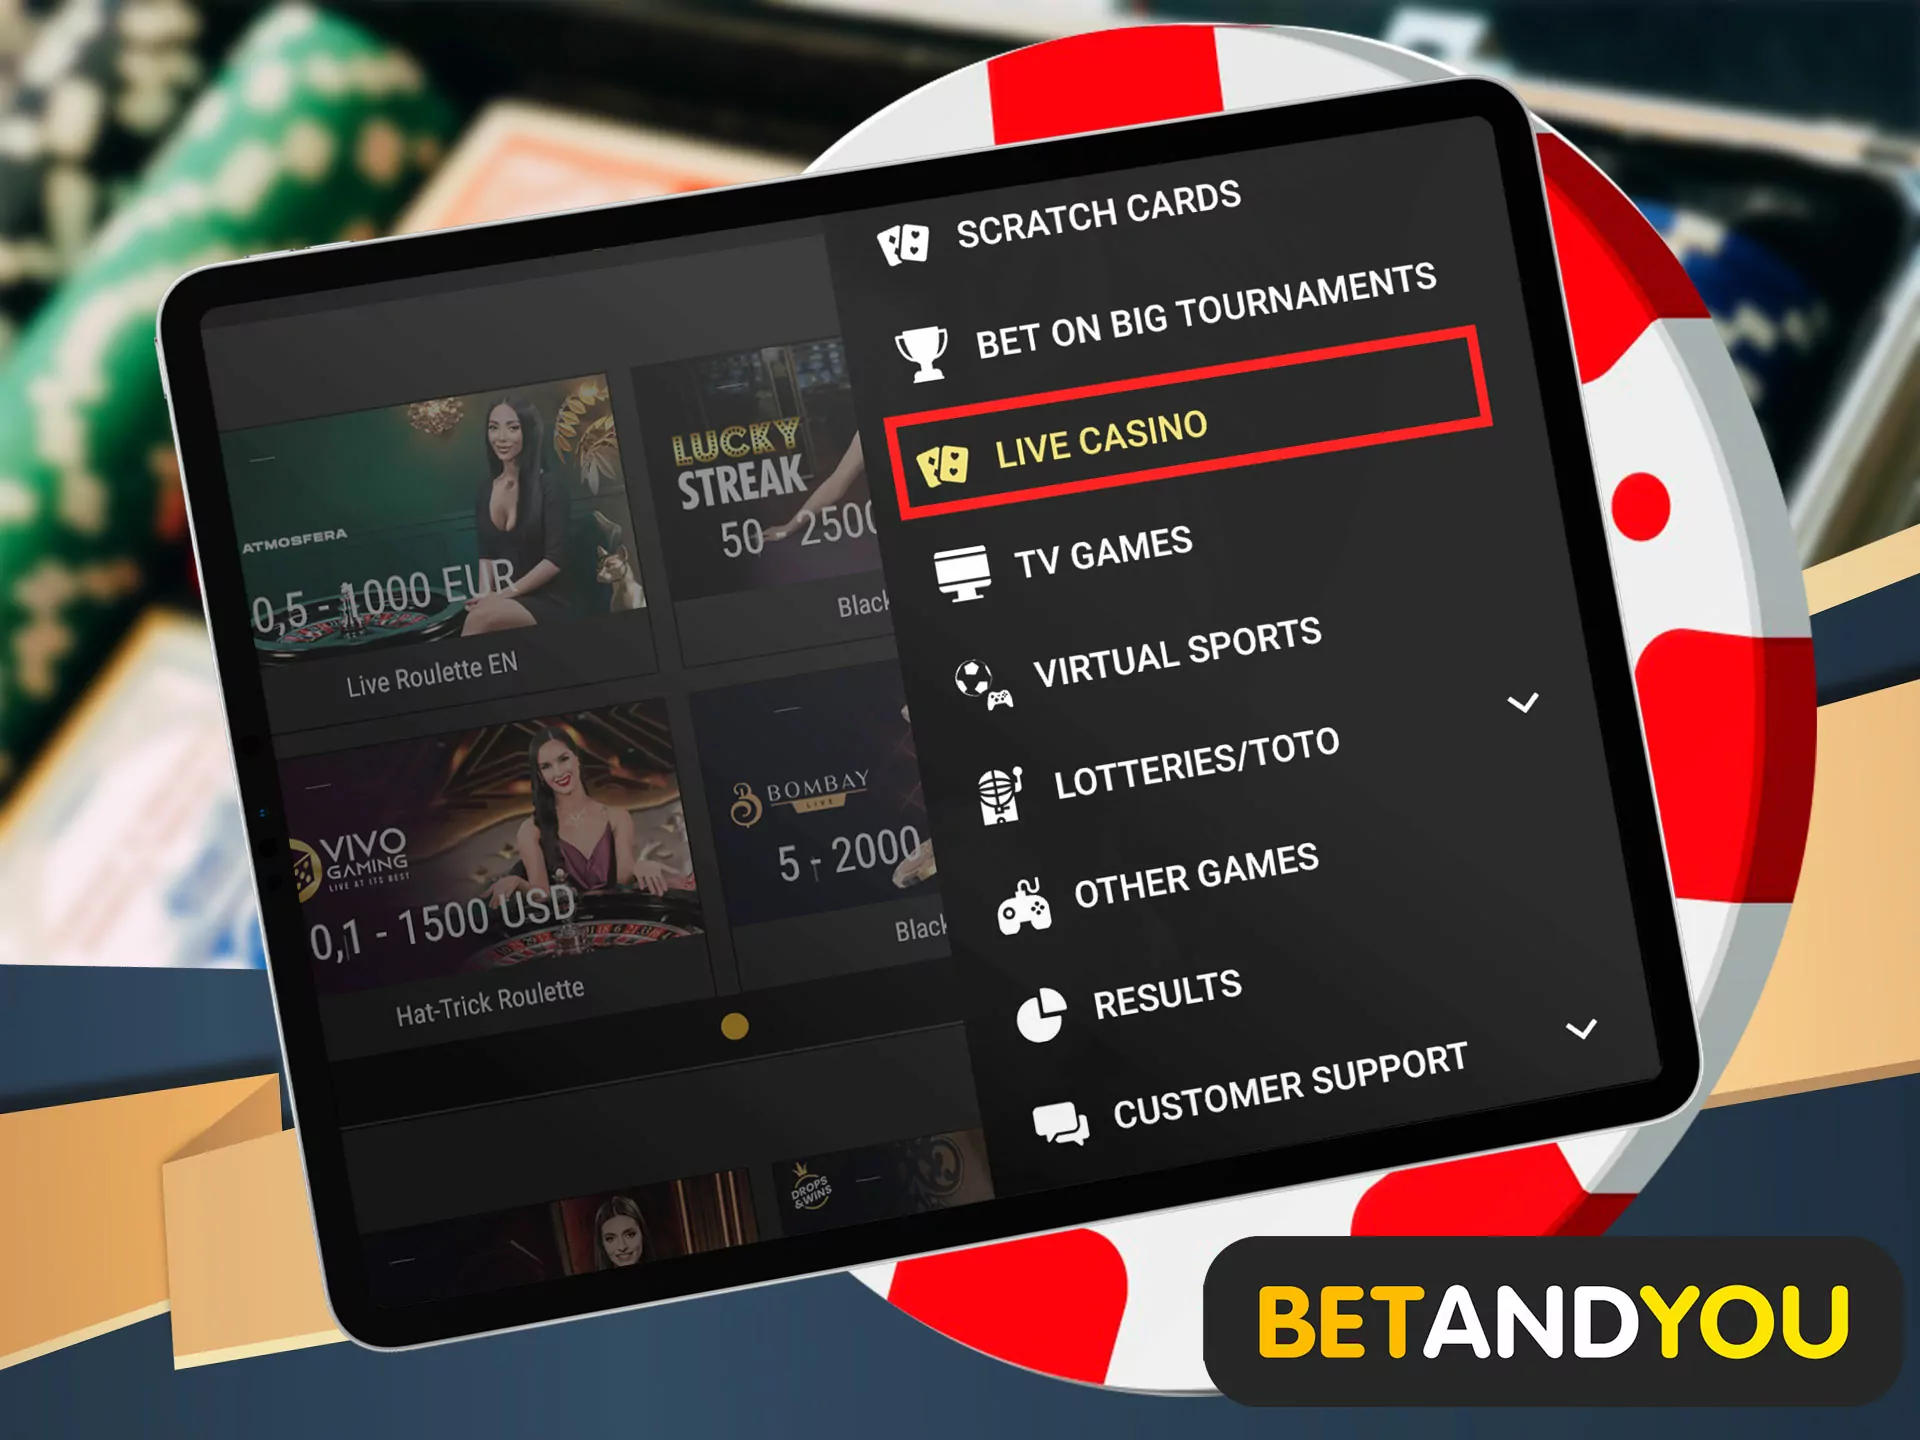 You have successfully registered, then deposit funds to a virtual account, decide on your favorite section and start playing at Betandyou casino.